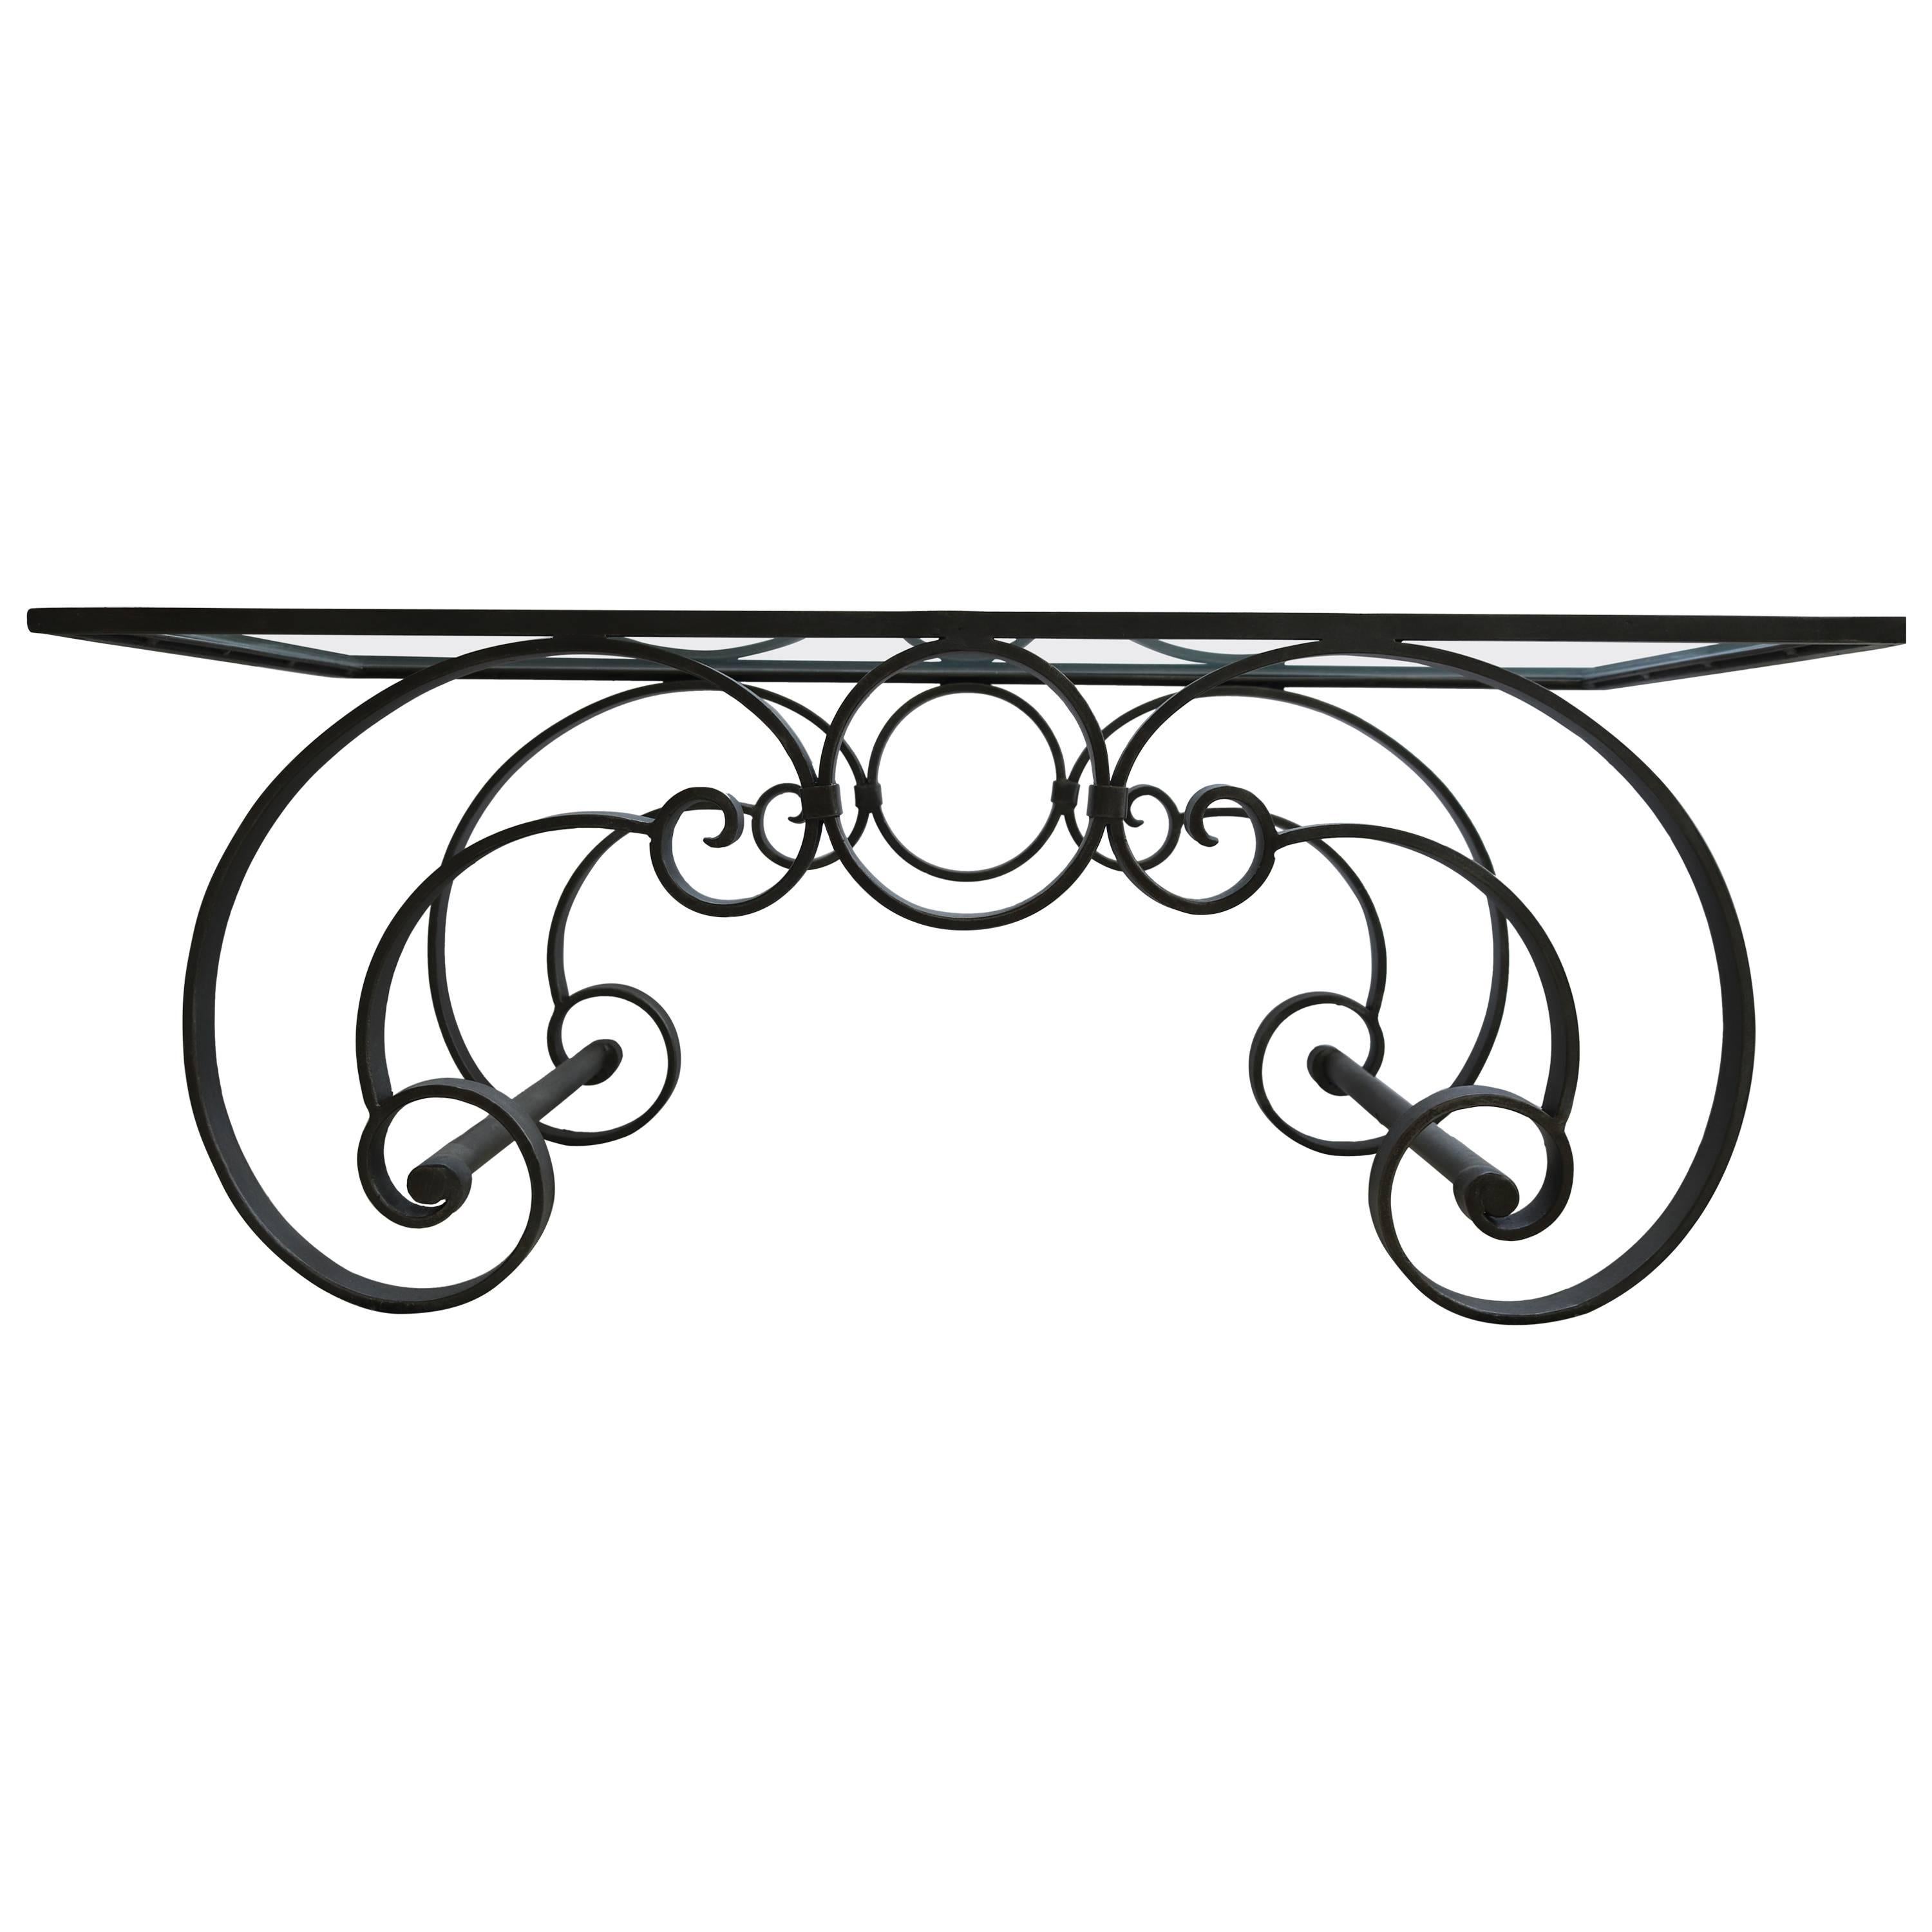 Perfect size, perfect Chic gracious designer Cocktail Table for Garden or Living Room!

A Mid-Century Modern Black Iron Cocktail Table, inspired designed masterfully hand forged scrolling wrought iron table with a clear glass inset top. 
The table